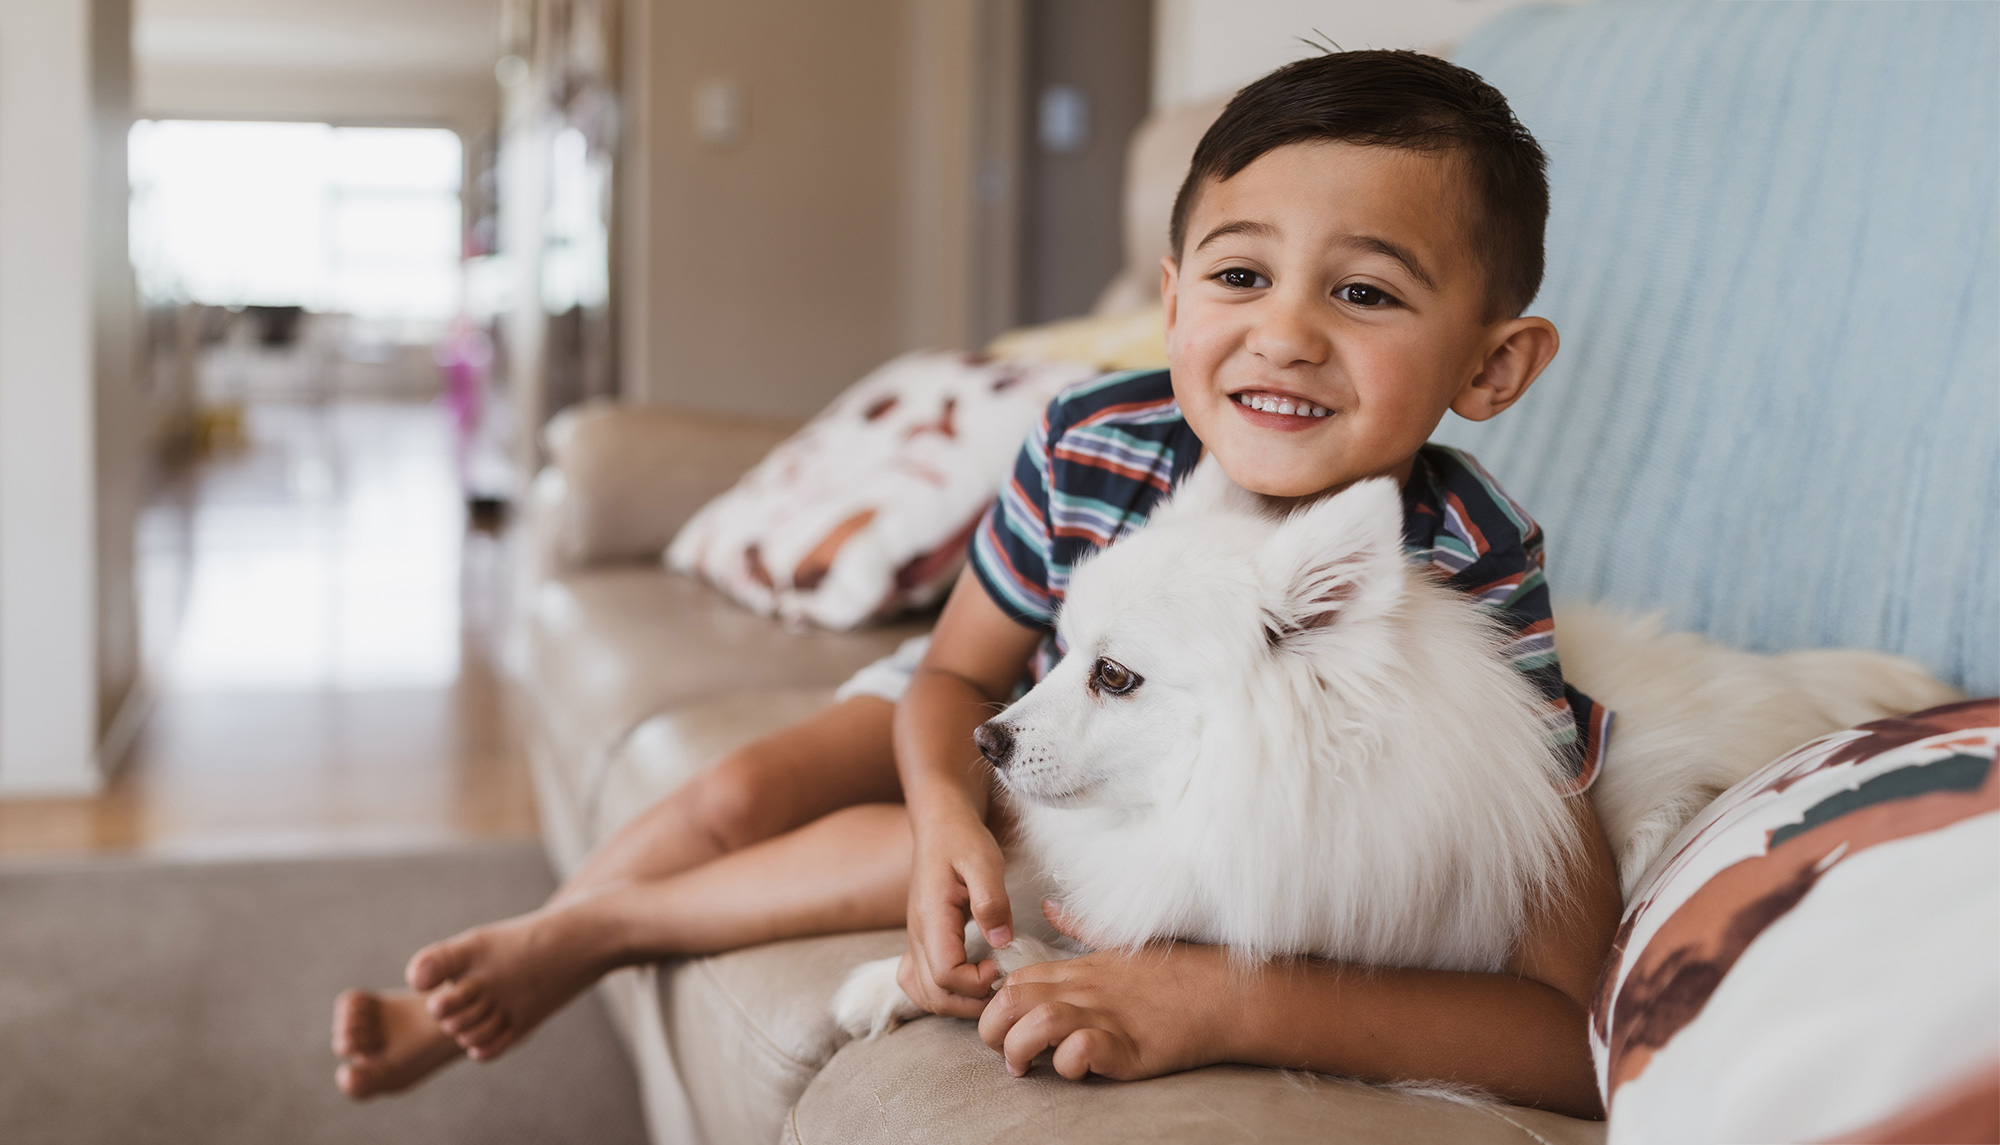 Toddler and Japanese Spitz dog on living room sofa